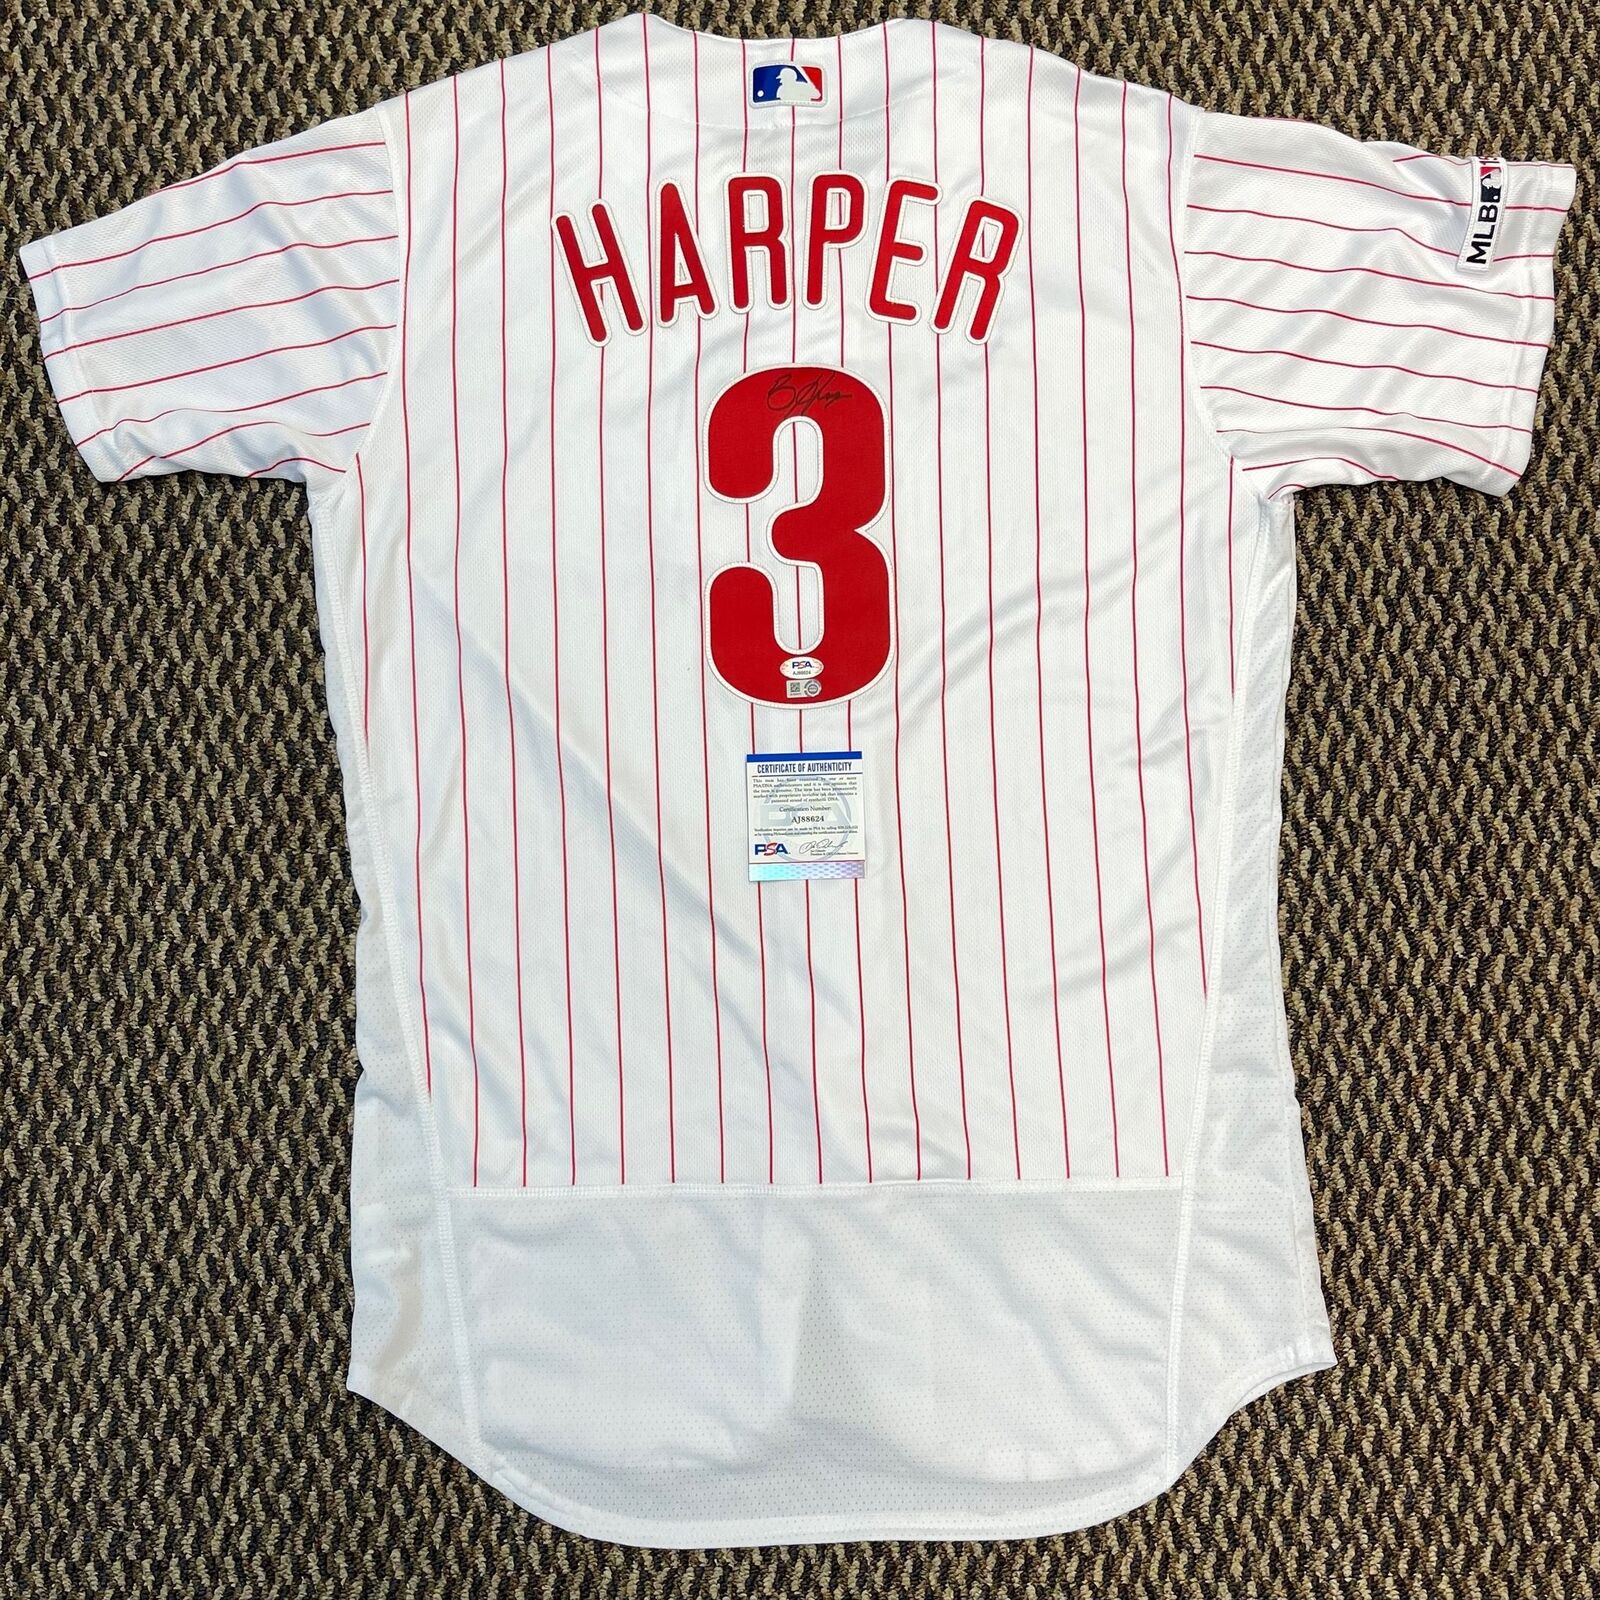 Bryce Harper Autographed Jerseys, Signed Bryce Harper Inscripted